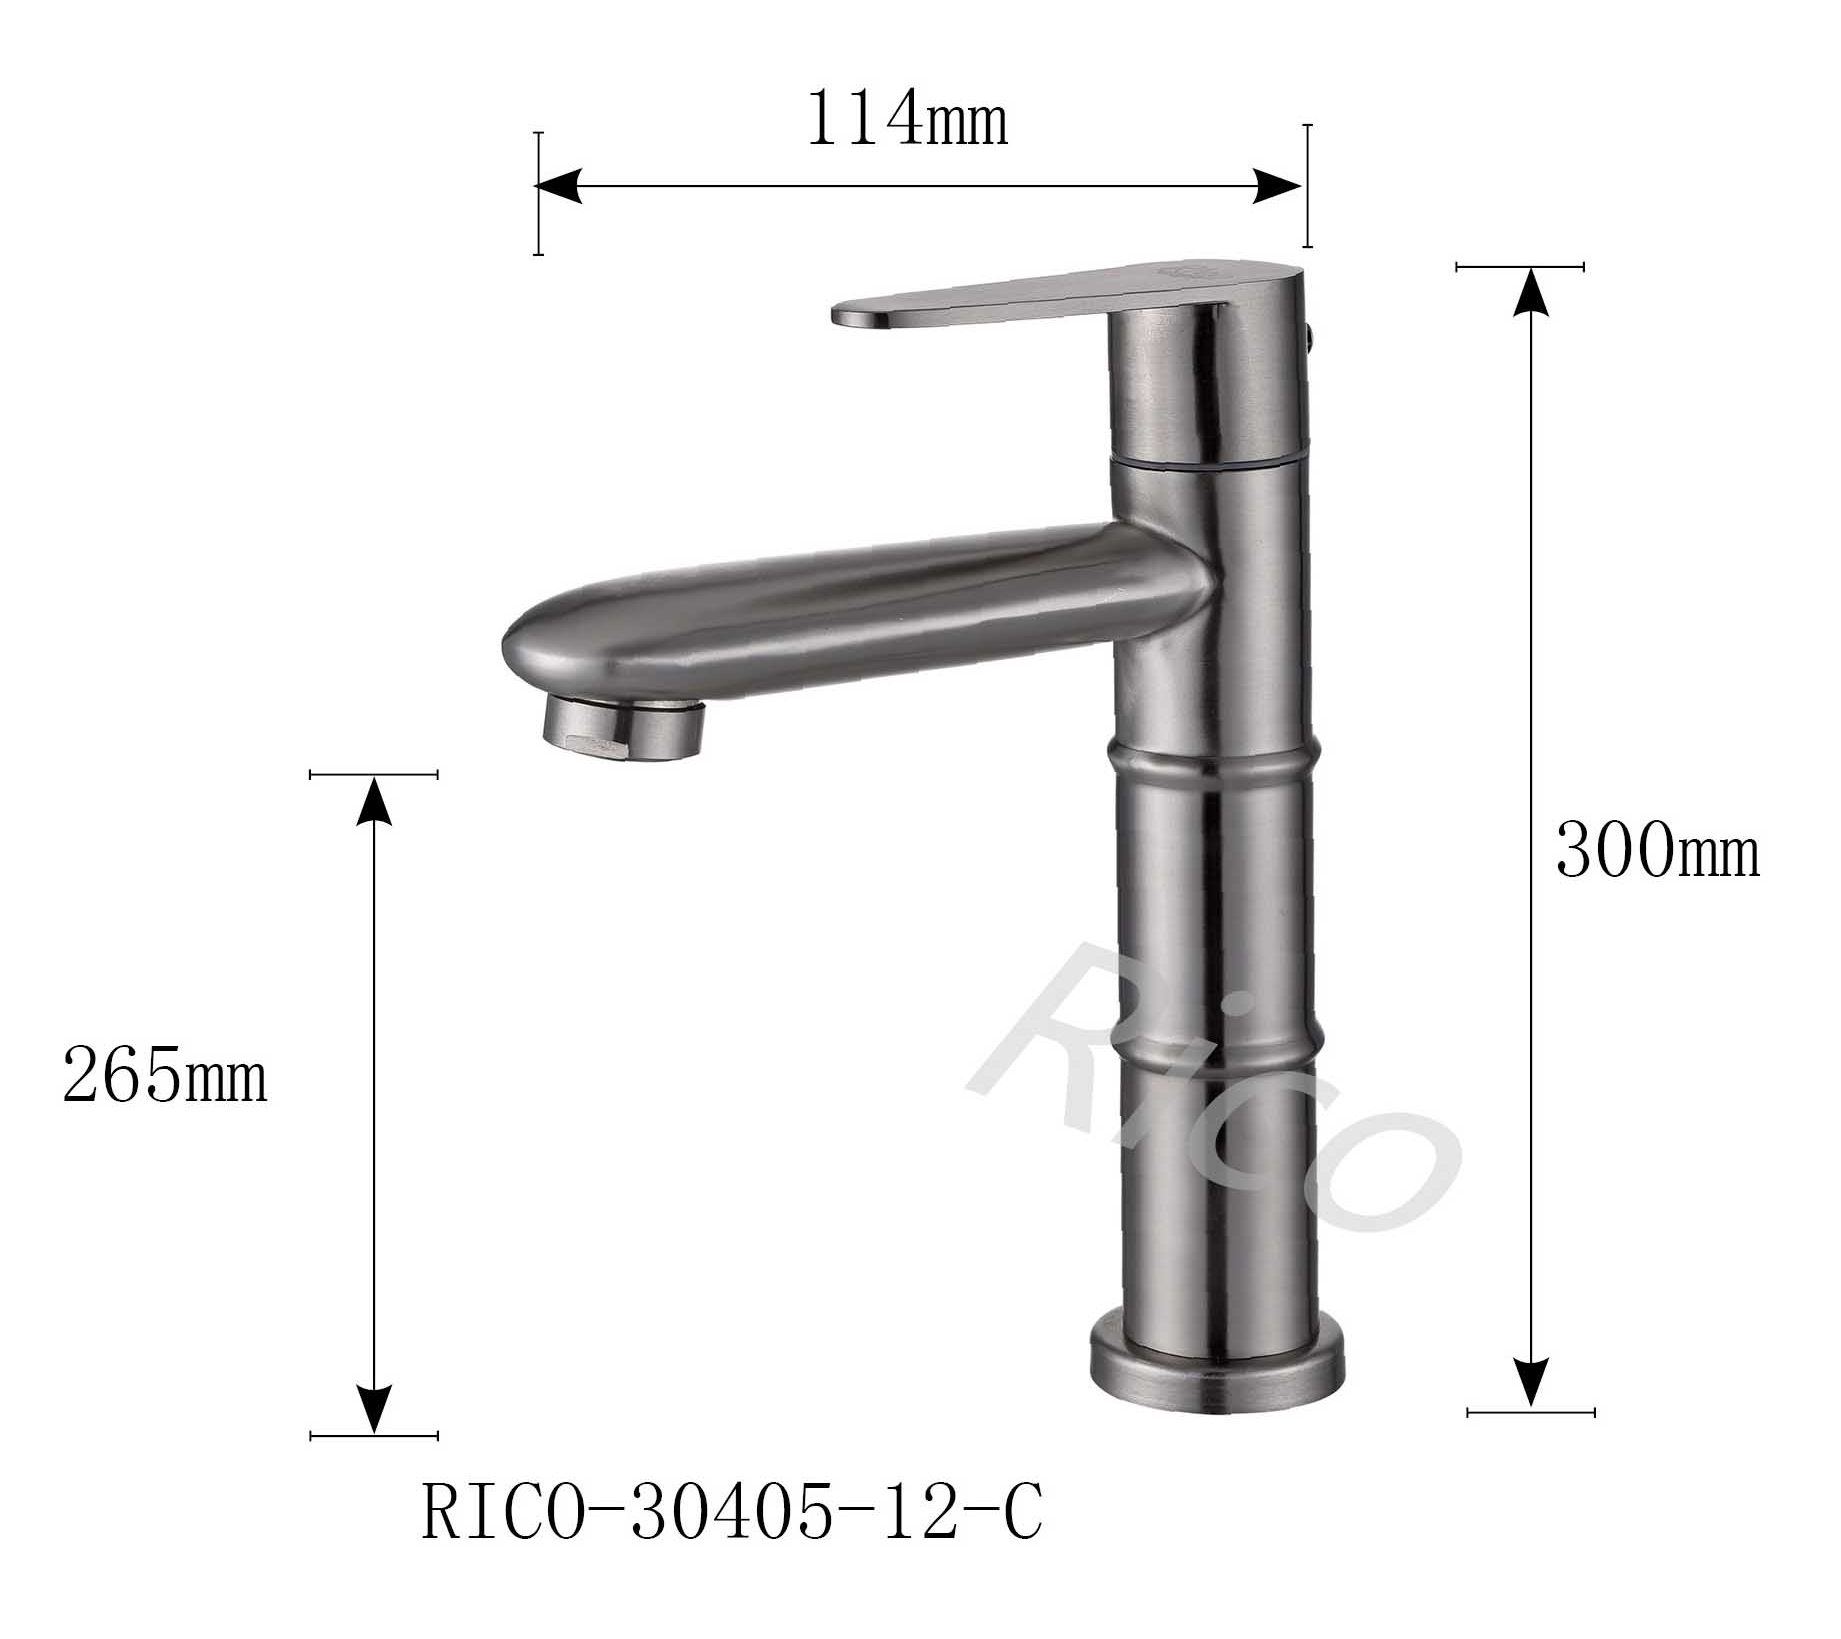 Rico : Stainless Steel Tall Basin Cold Tap – RICO-30405-12-C